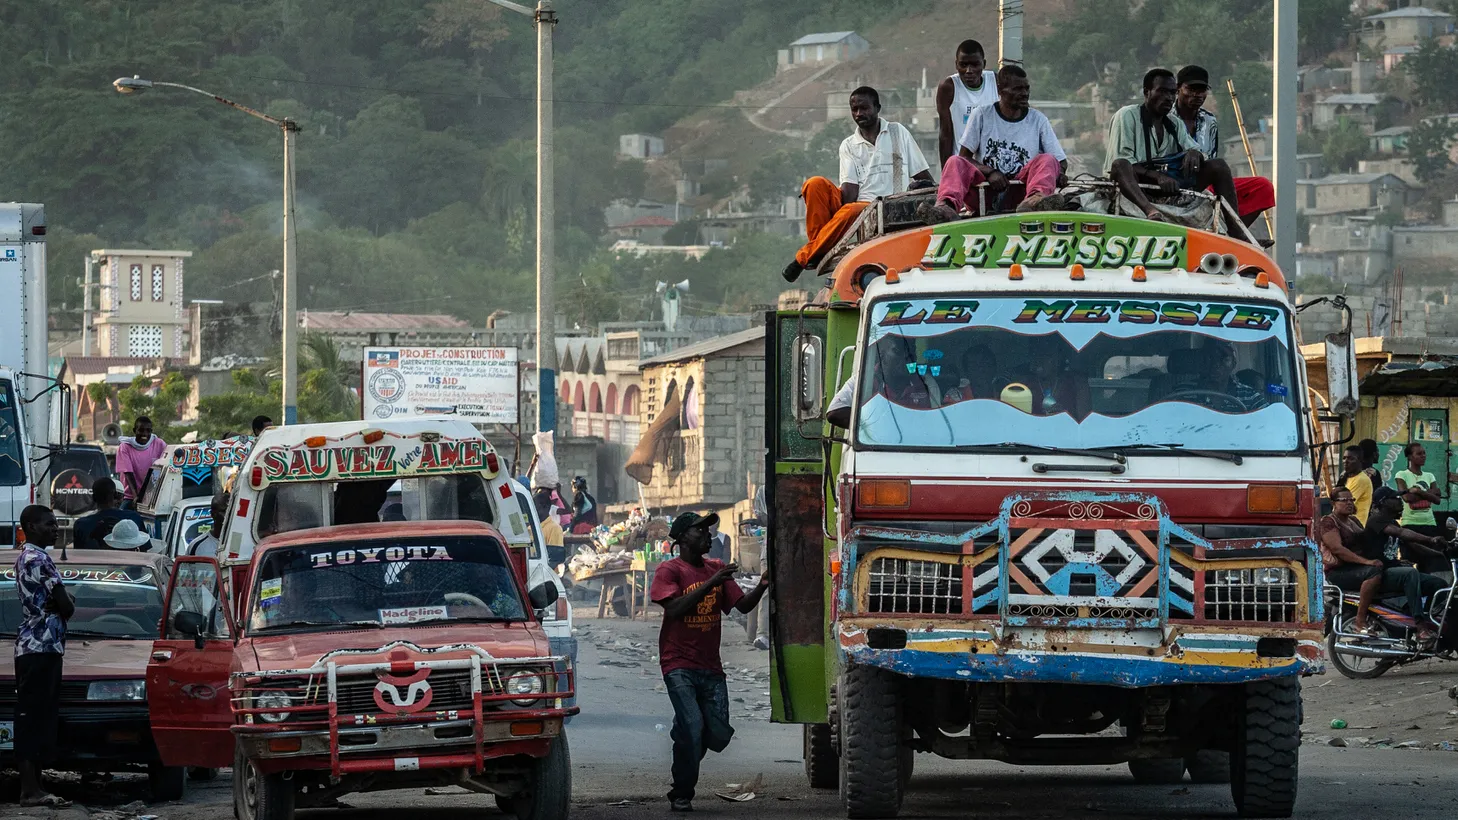 Passengers ride on the roof of a bus in Cap-Haïtien, Haiti, a country still struggling with poverty.